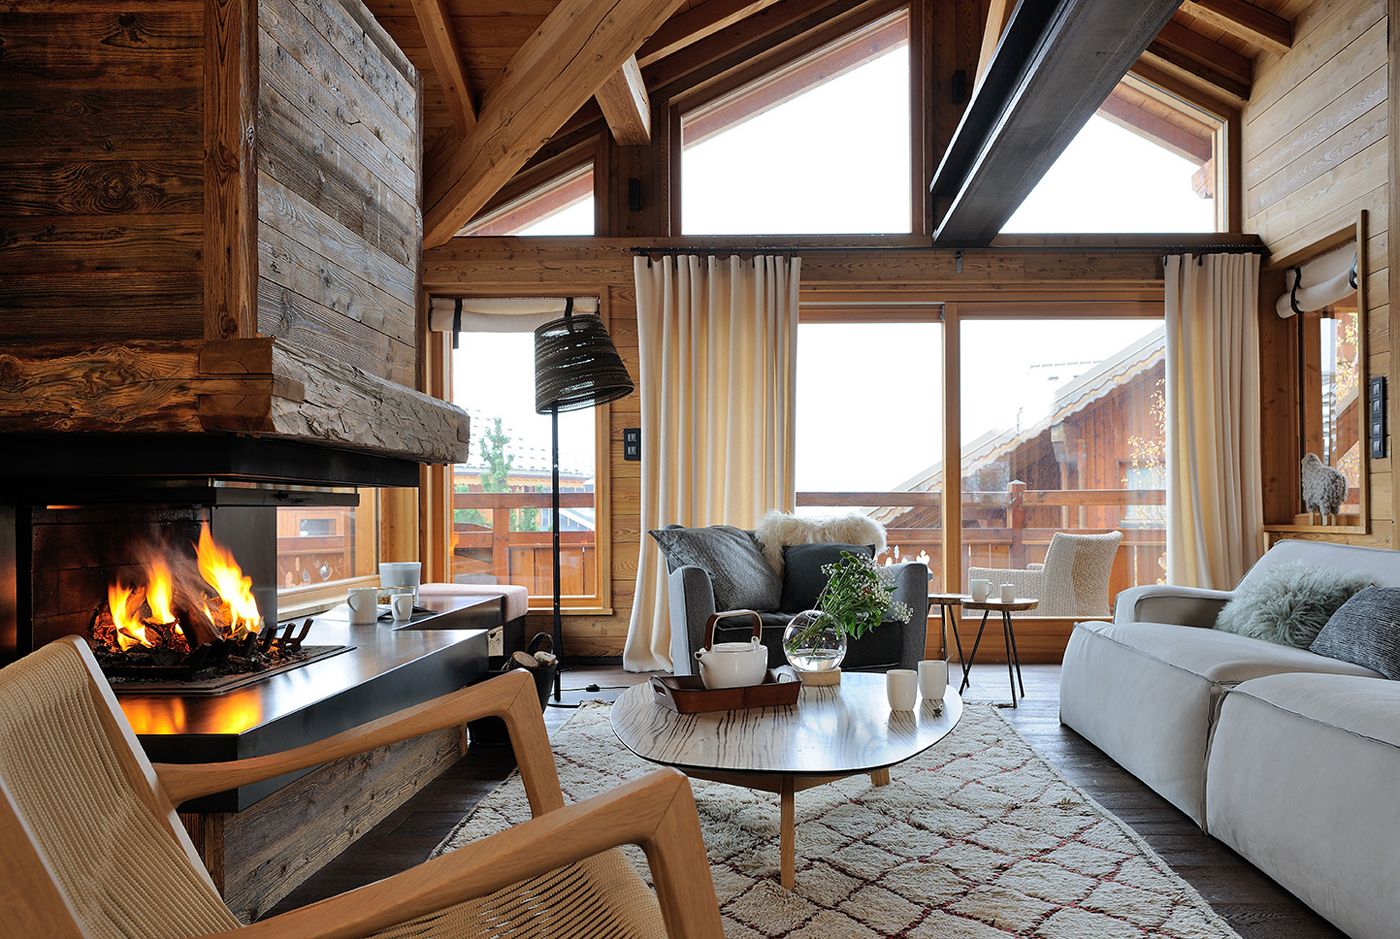 6 bed Chalet For Sale in Alpe d'Huez Grand Domaine, French Alps